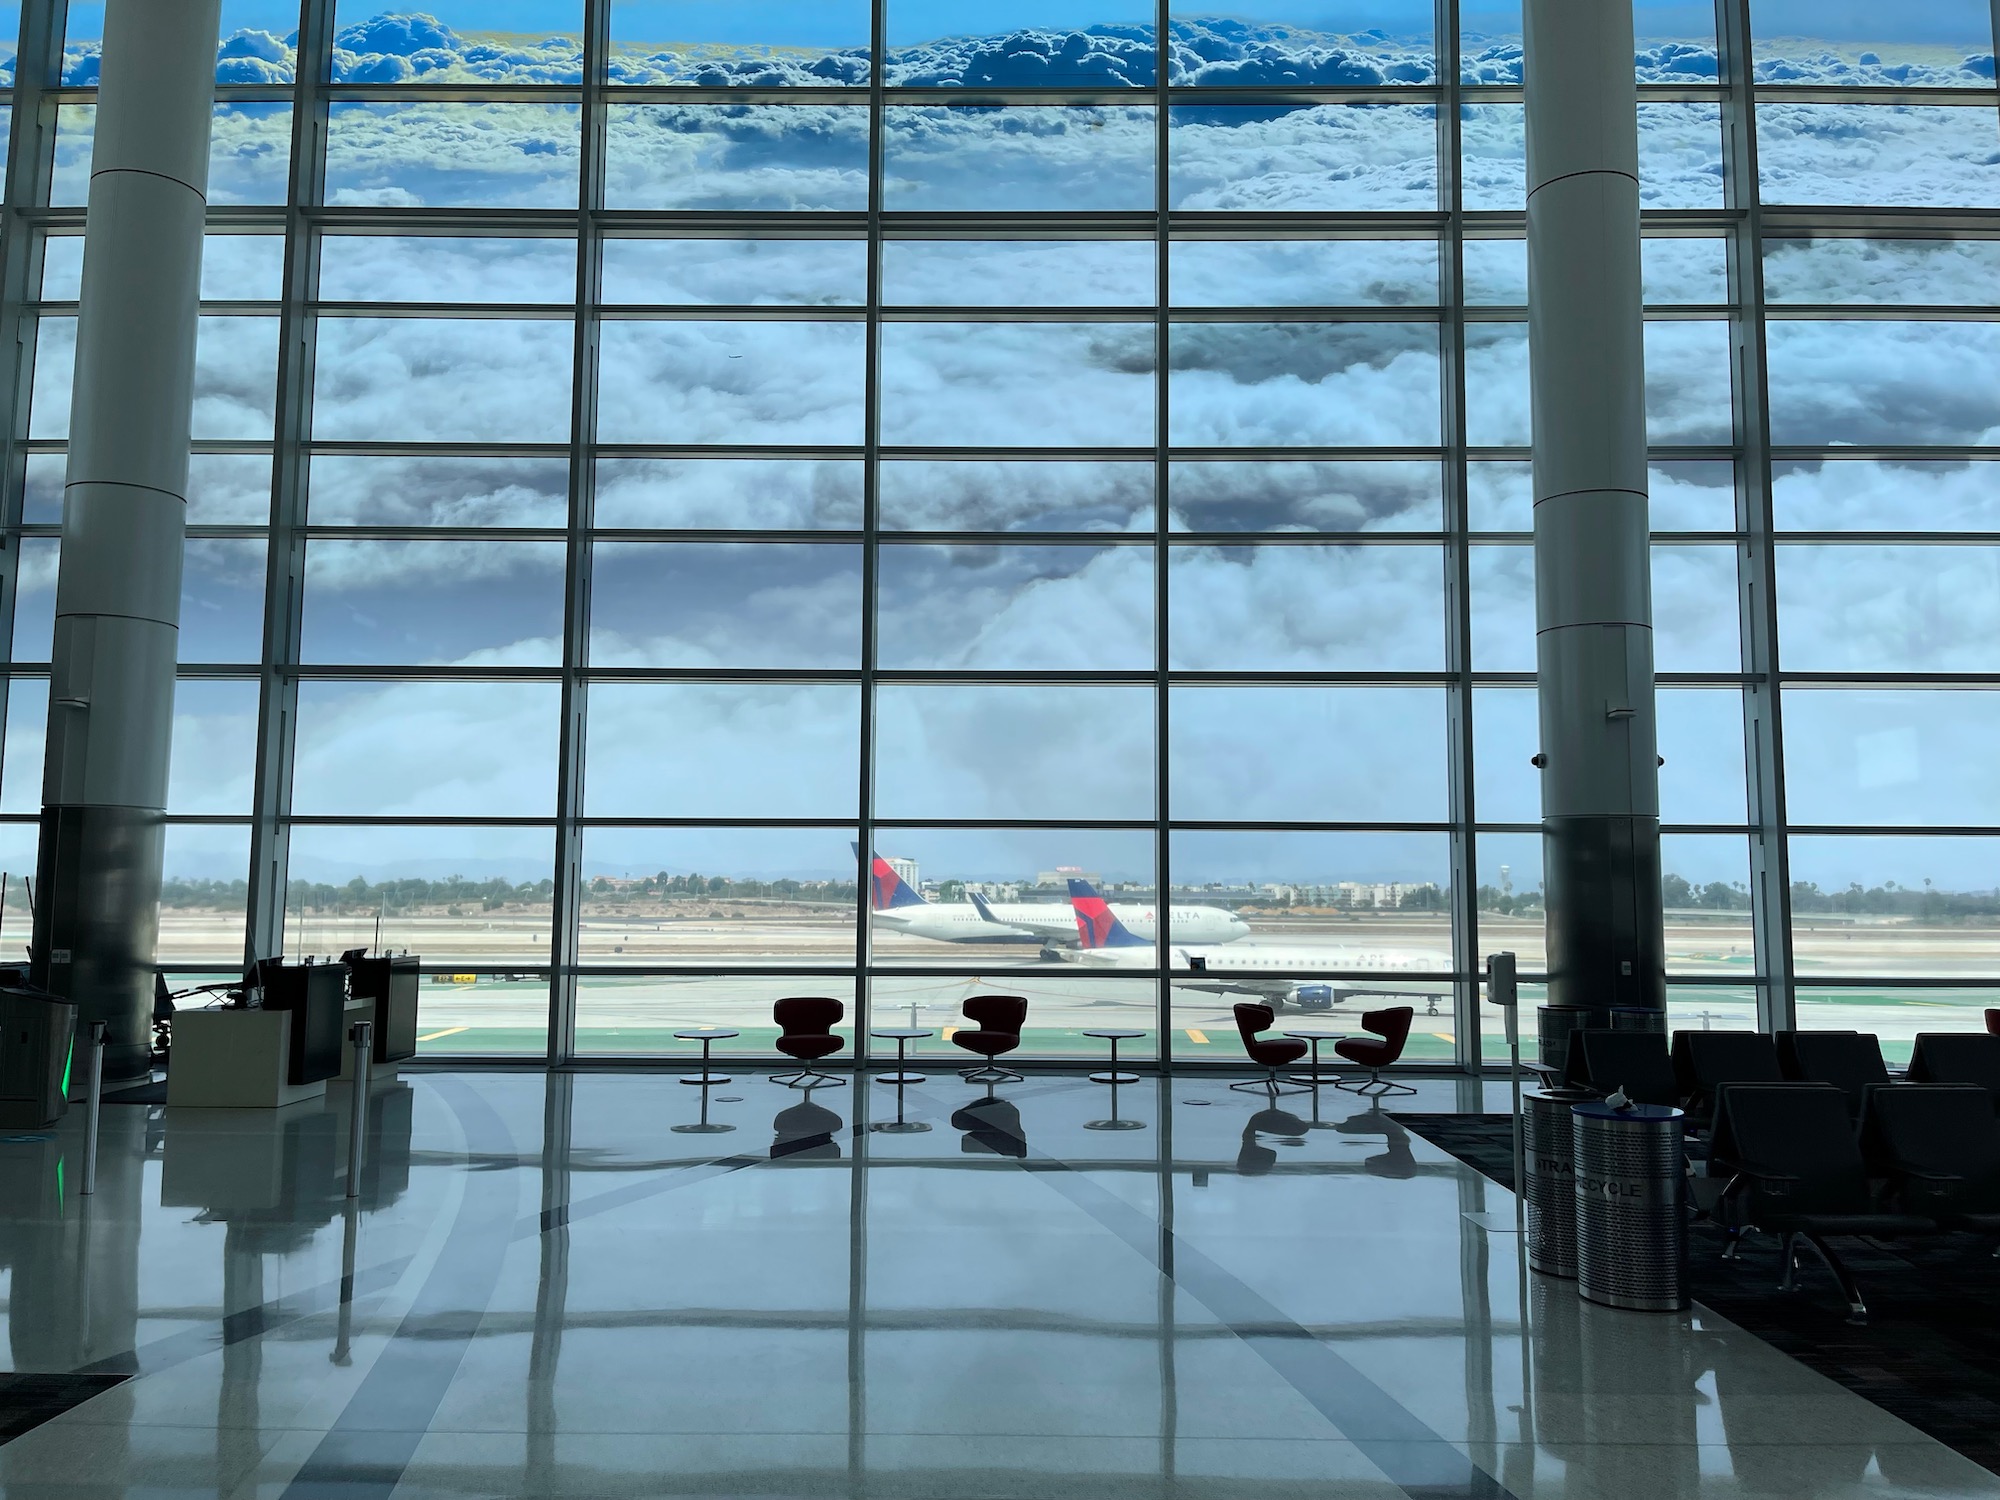 a large glass window with a view of an airplane and runway